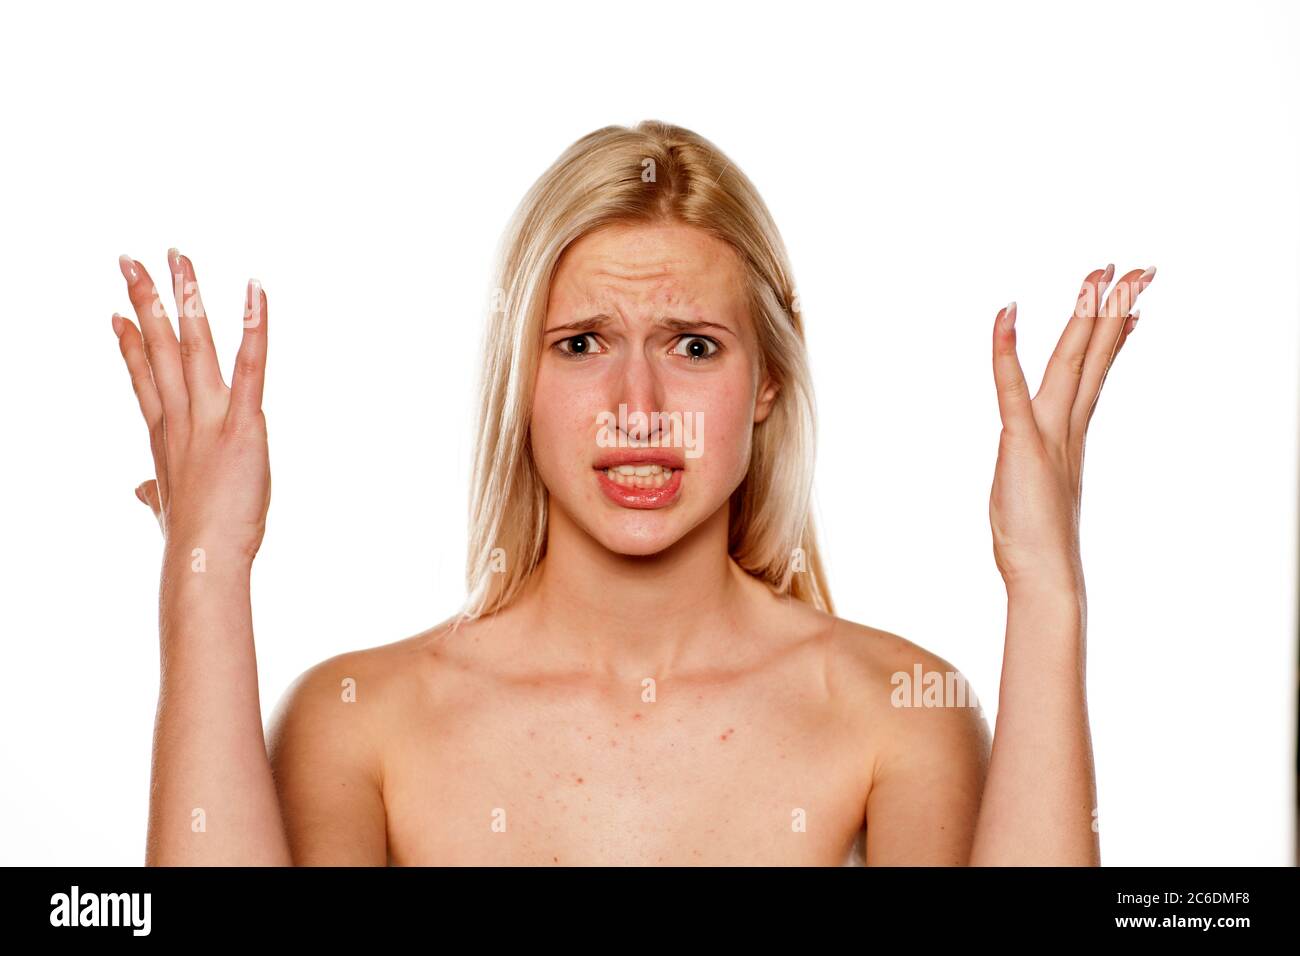 Upset blonde with pimples on her forehead Stock Photo